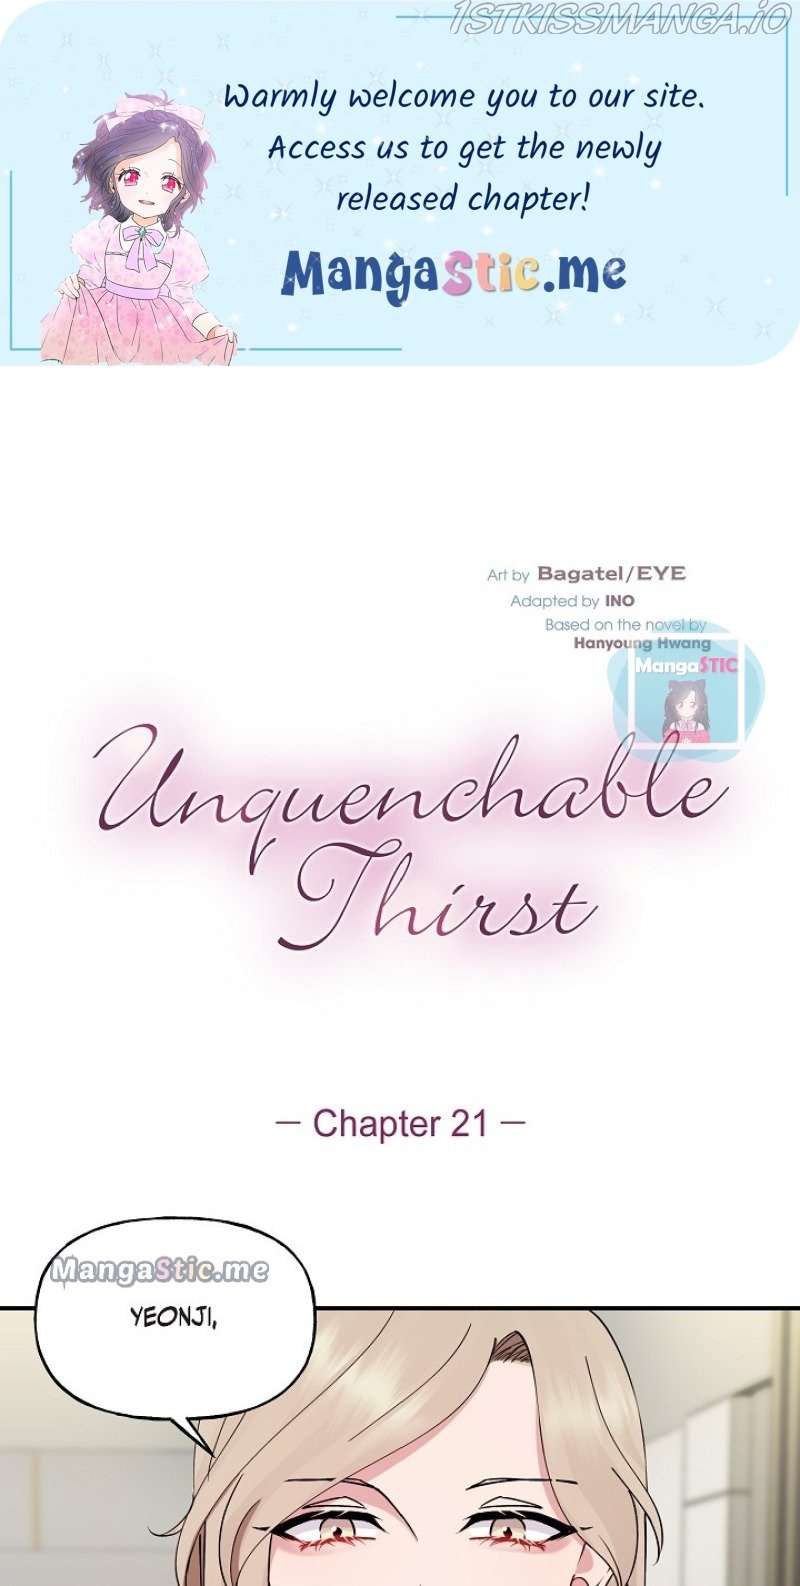 Unquenchable Thirst chapter 21